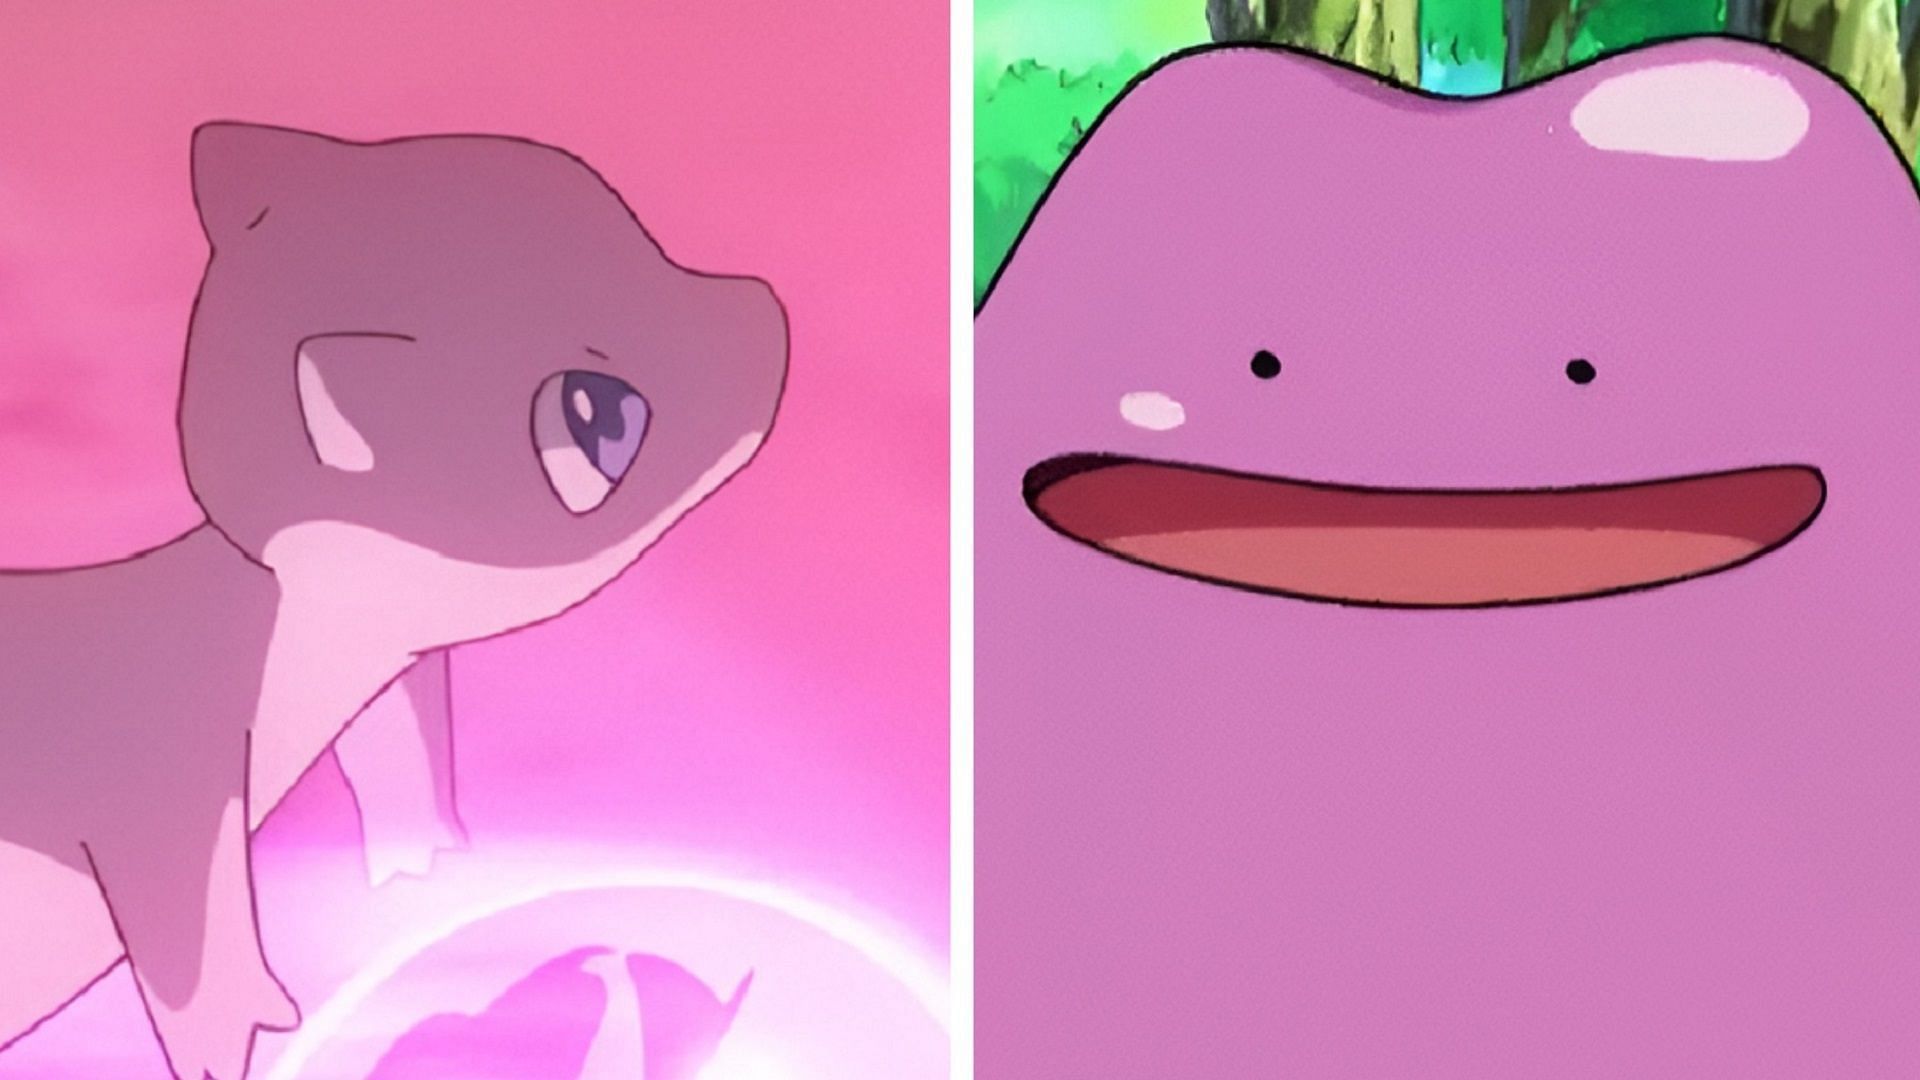 Mew and Ditto as they appear in the Pokemon anime.